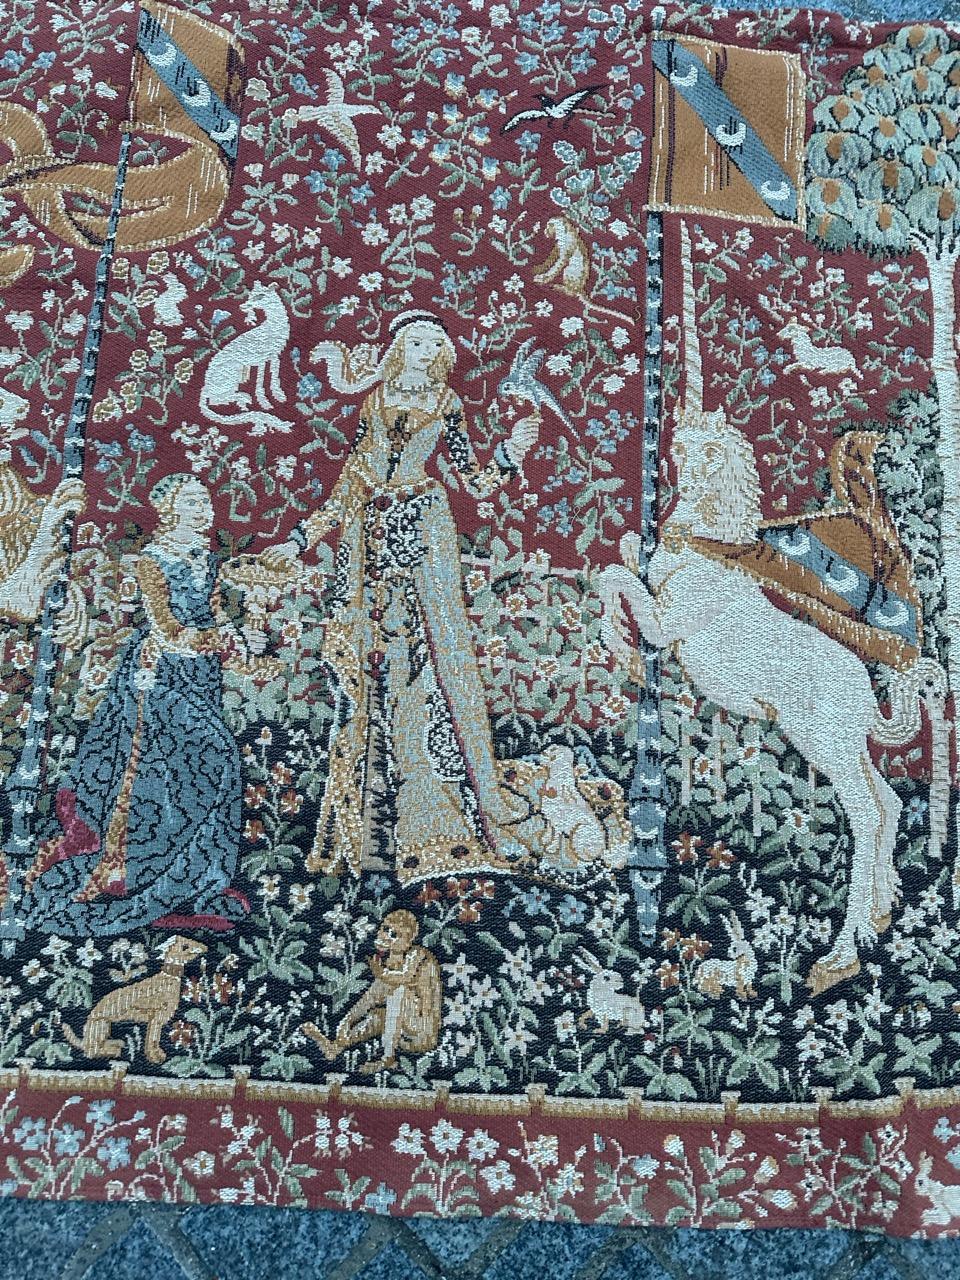 Nice vintage French Aubusson style tapestry with a design of a 15th century museum tapestry “Dame à la licorne - le goût » (lady with licorn - the taste) and beautiful colours, woven by the Jacquard looms with wool, in France.

✨✨✨
